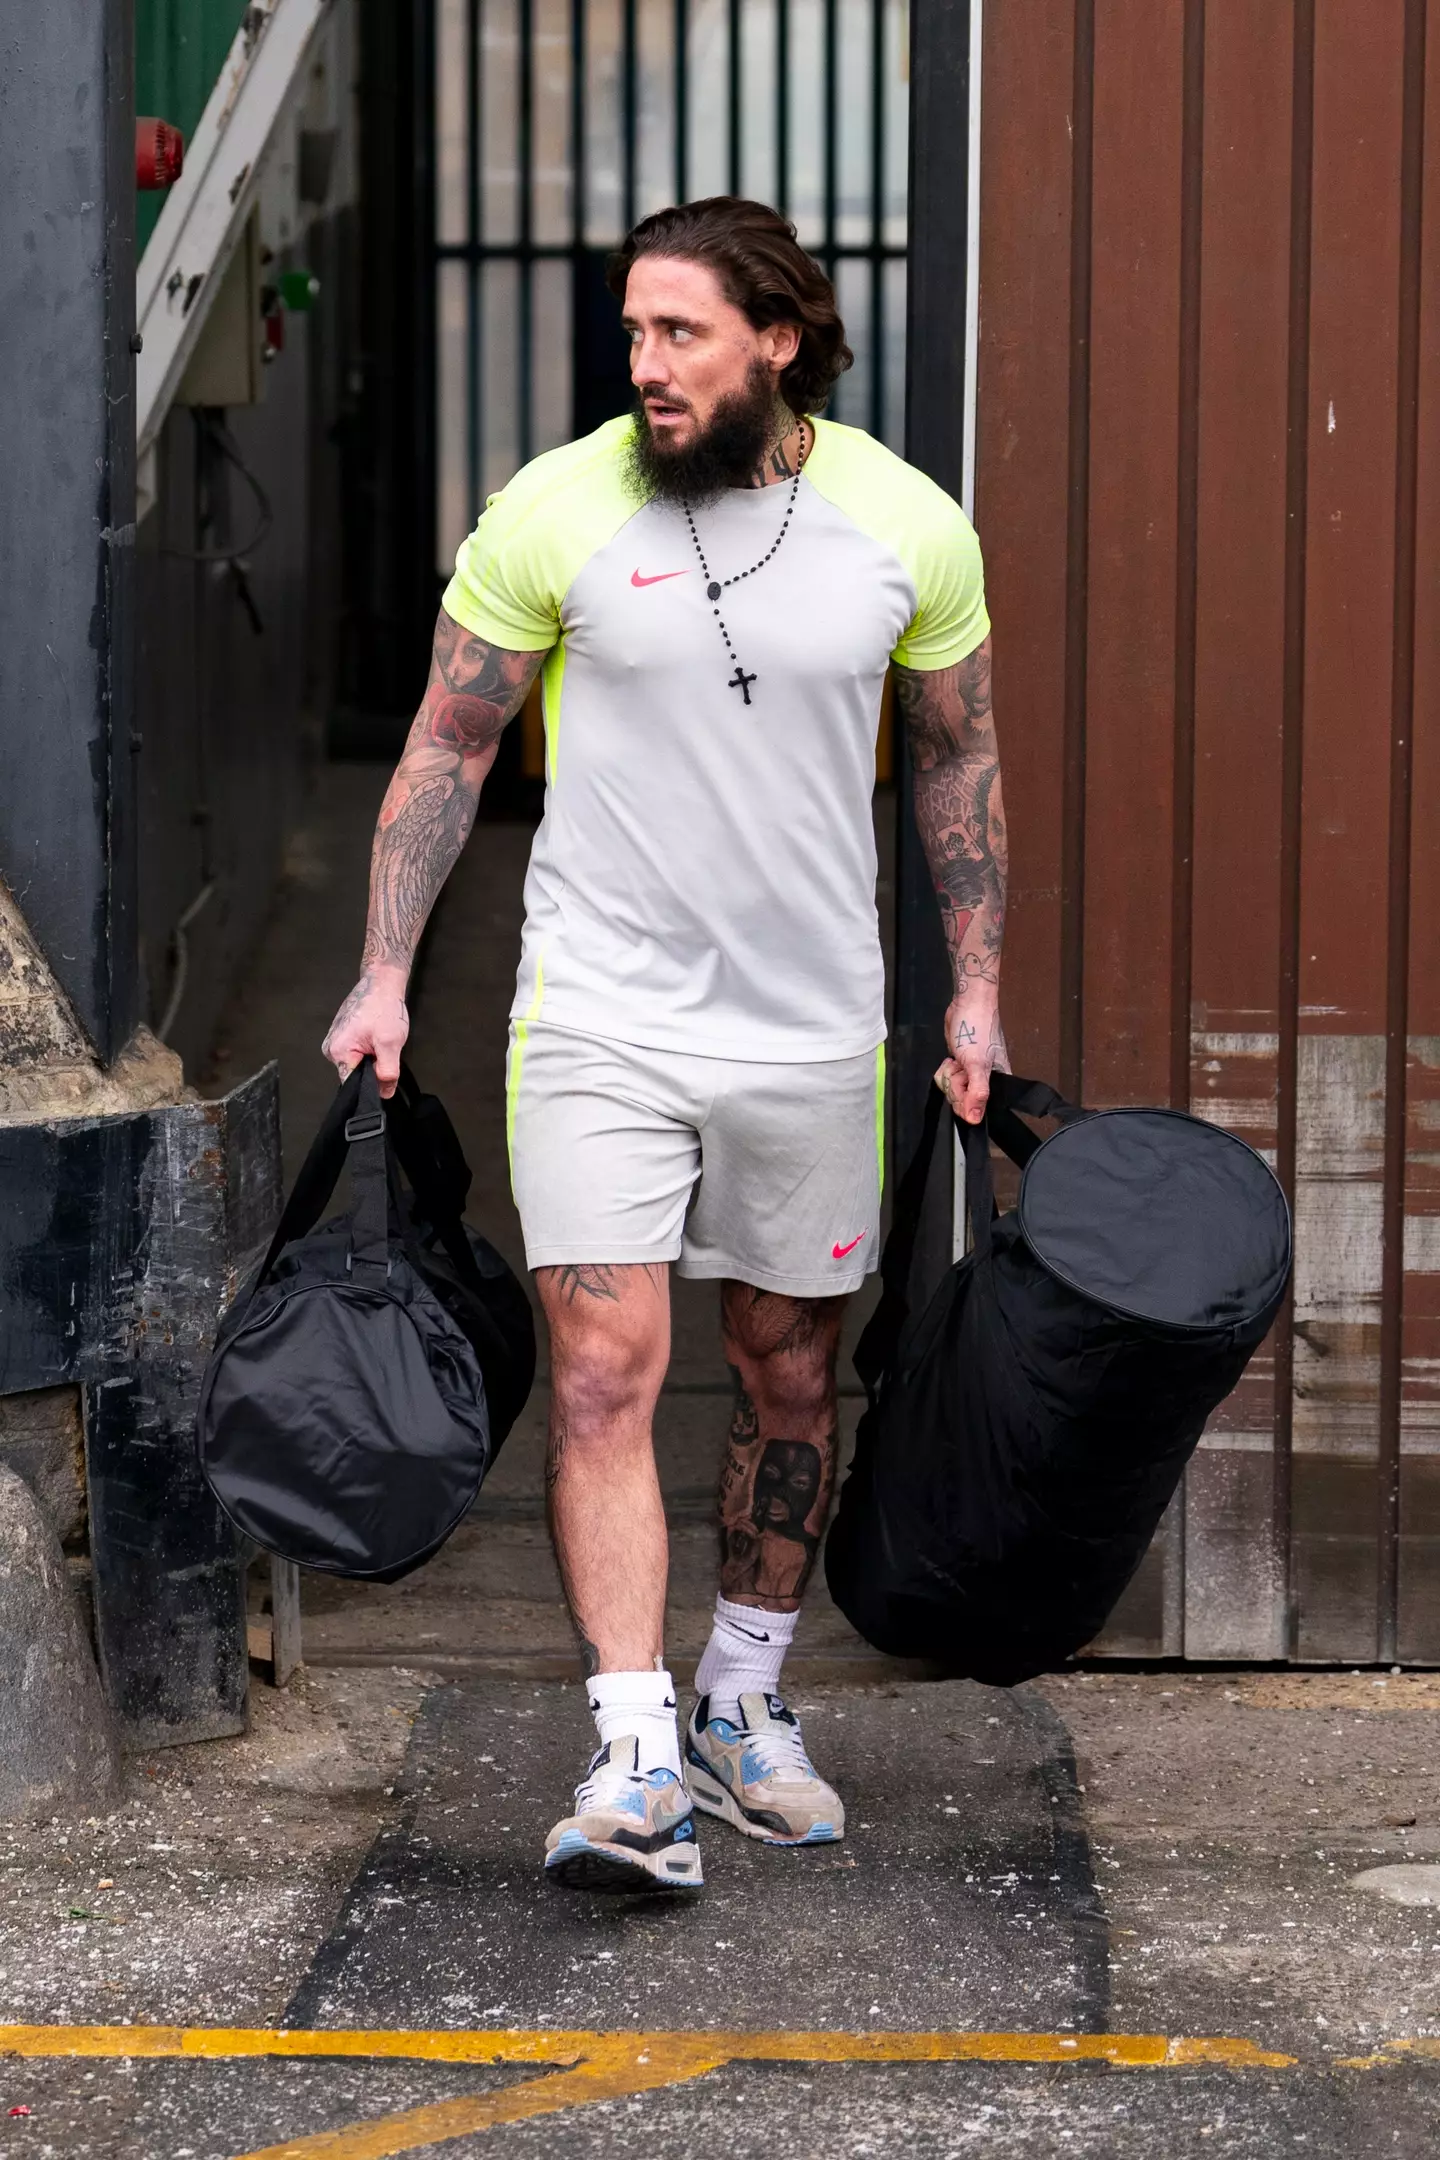 Stephen Bear was been pictured leaving HMP Brixton earlier today (17 January).